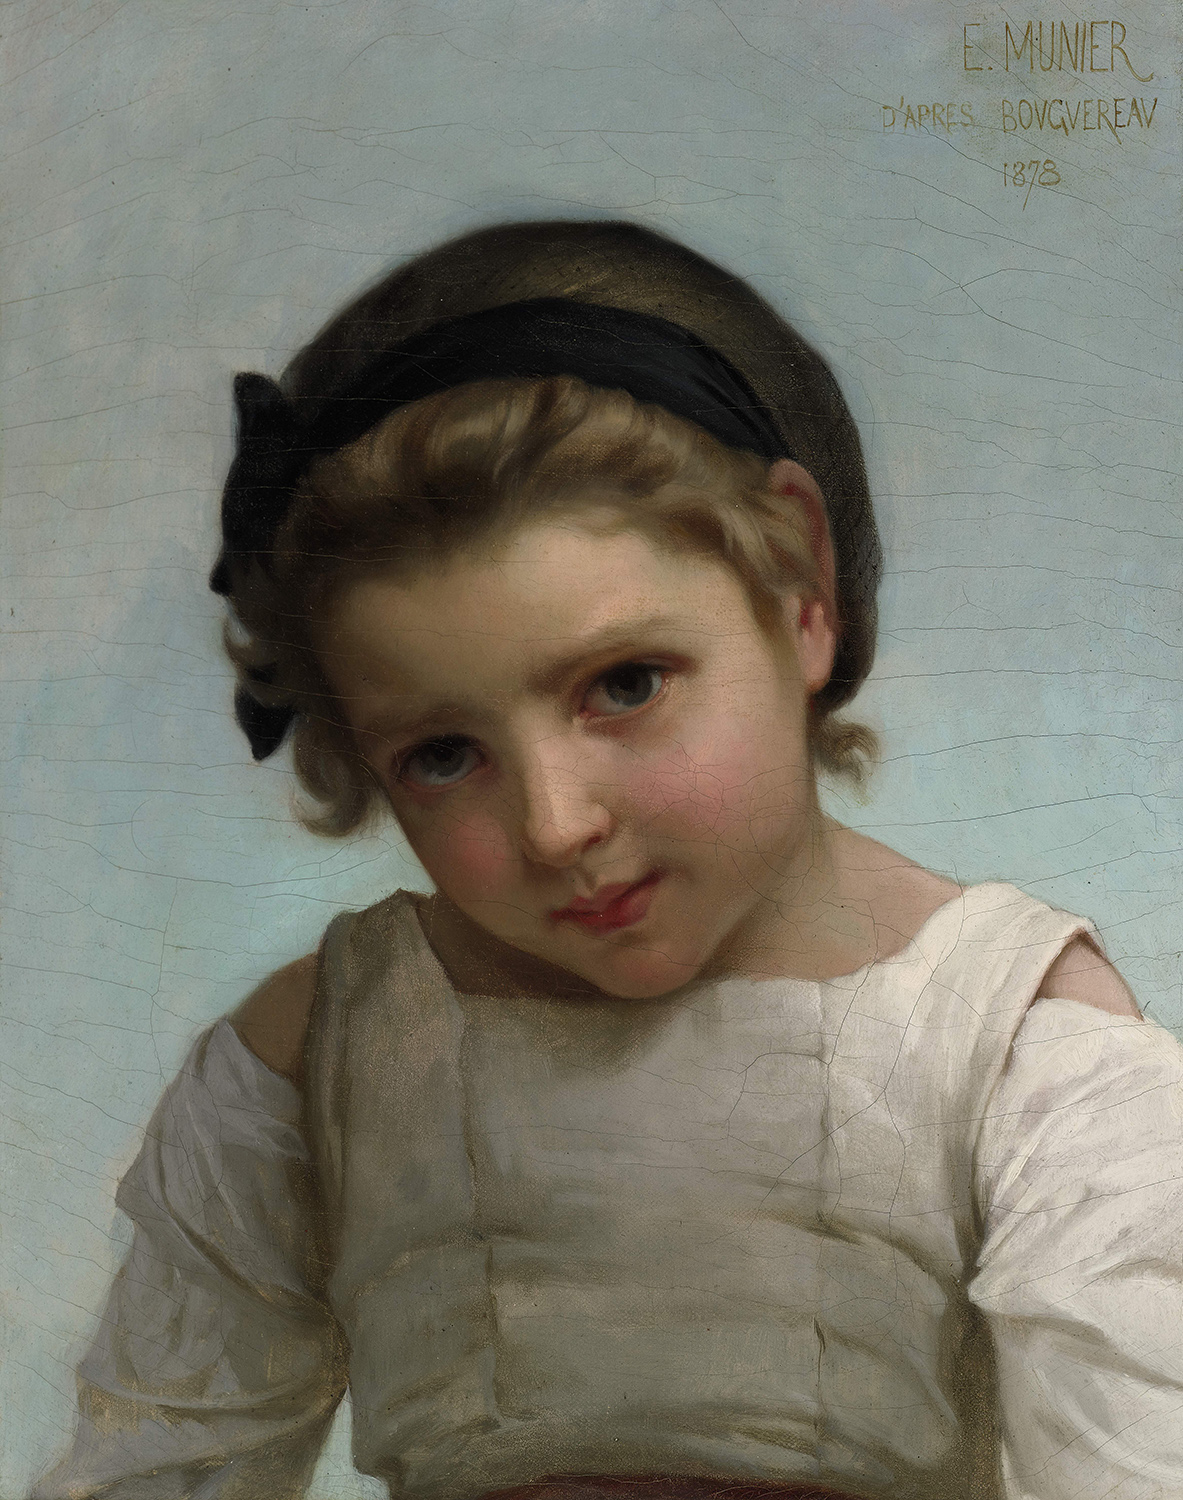 portrait of a young girl